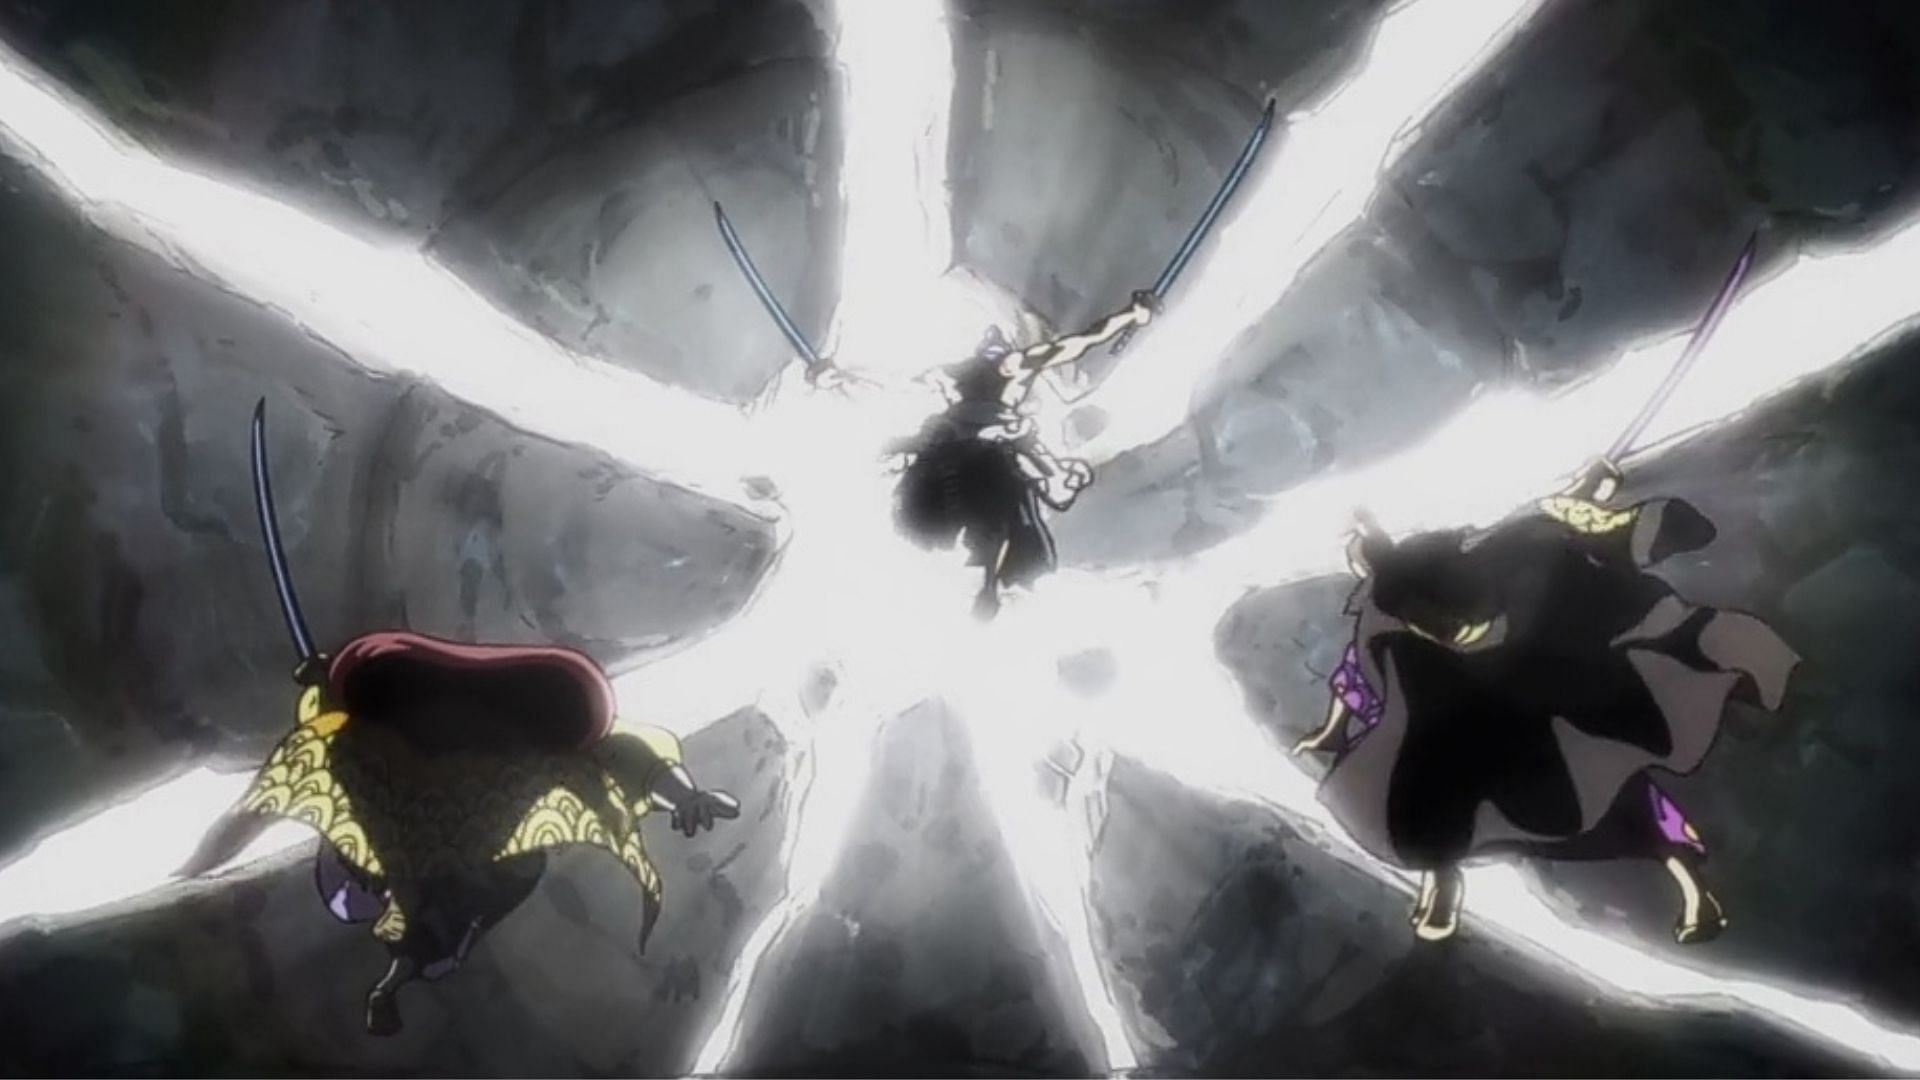 The the Daimyos break out of the cave in One Piece episode 1048 (Image via Toei Animation)